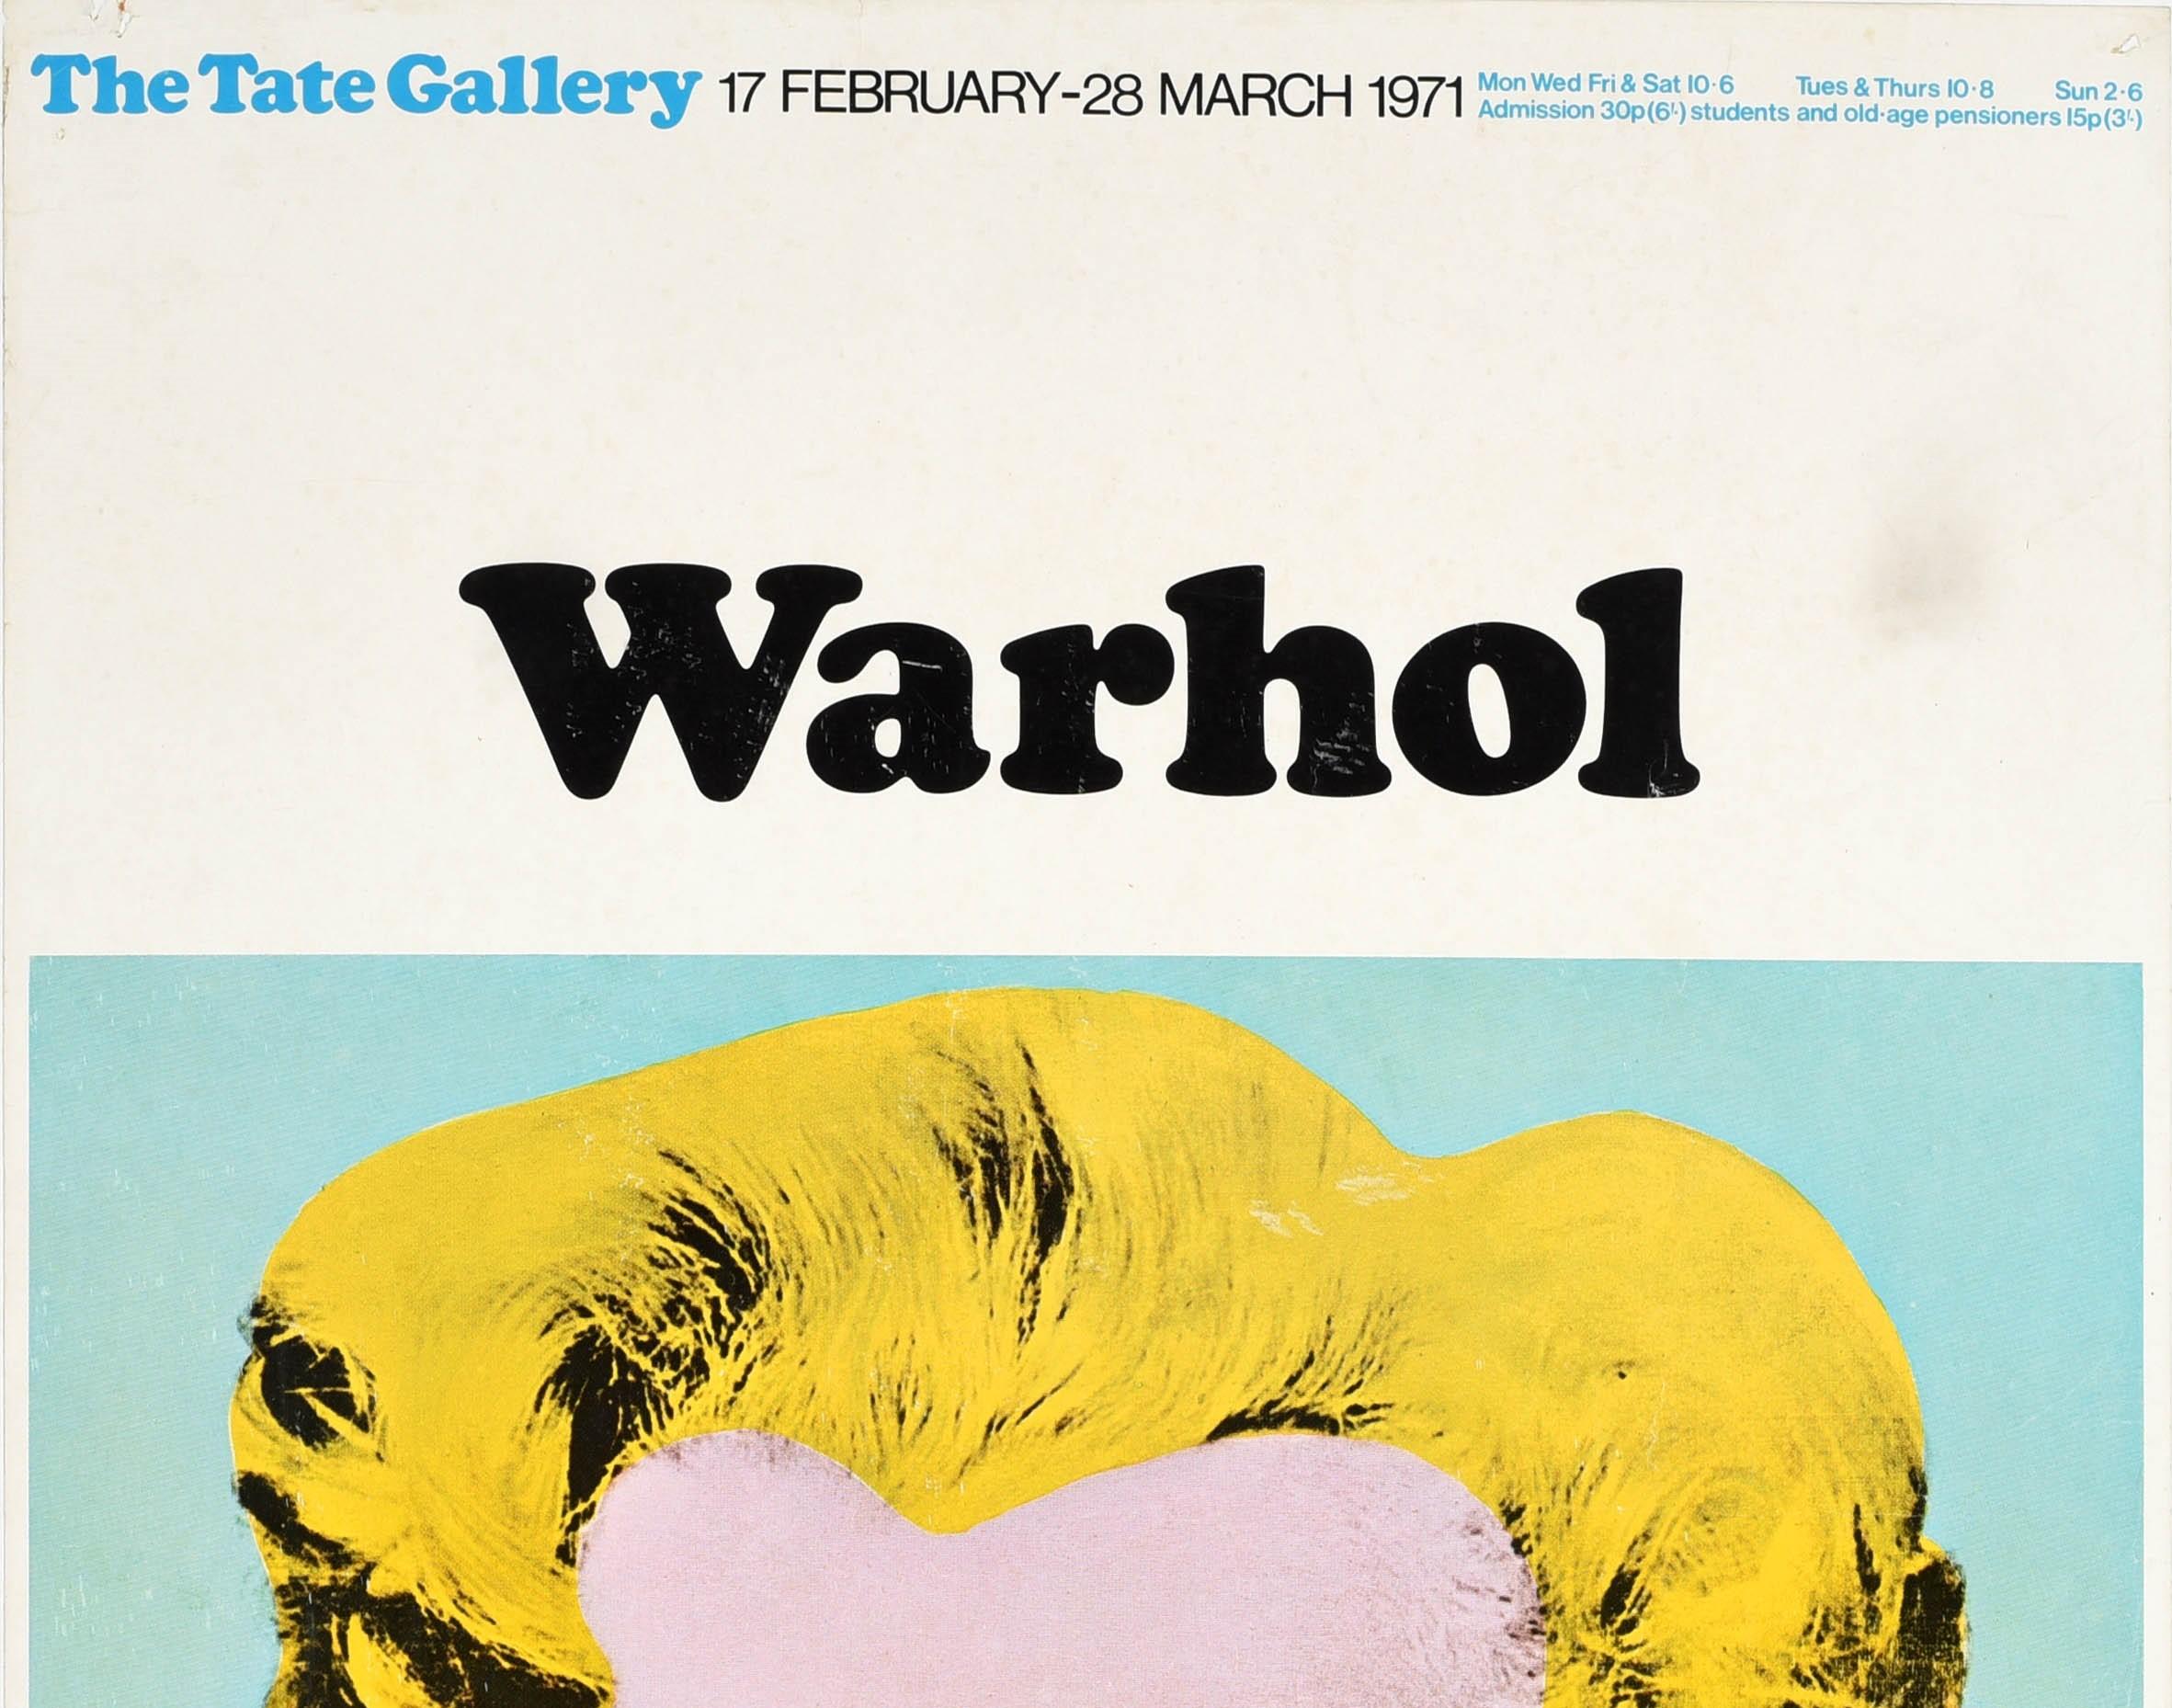 Original vintage art exhibition poster featuring a colourful iconic pop art image of Marilyn Monroe (1926-1962) by the notable American artist Andy Warhol (1928-1987) for a Warhol exhibition at the Tate Gallery in London from 17 February to 28 March